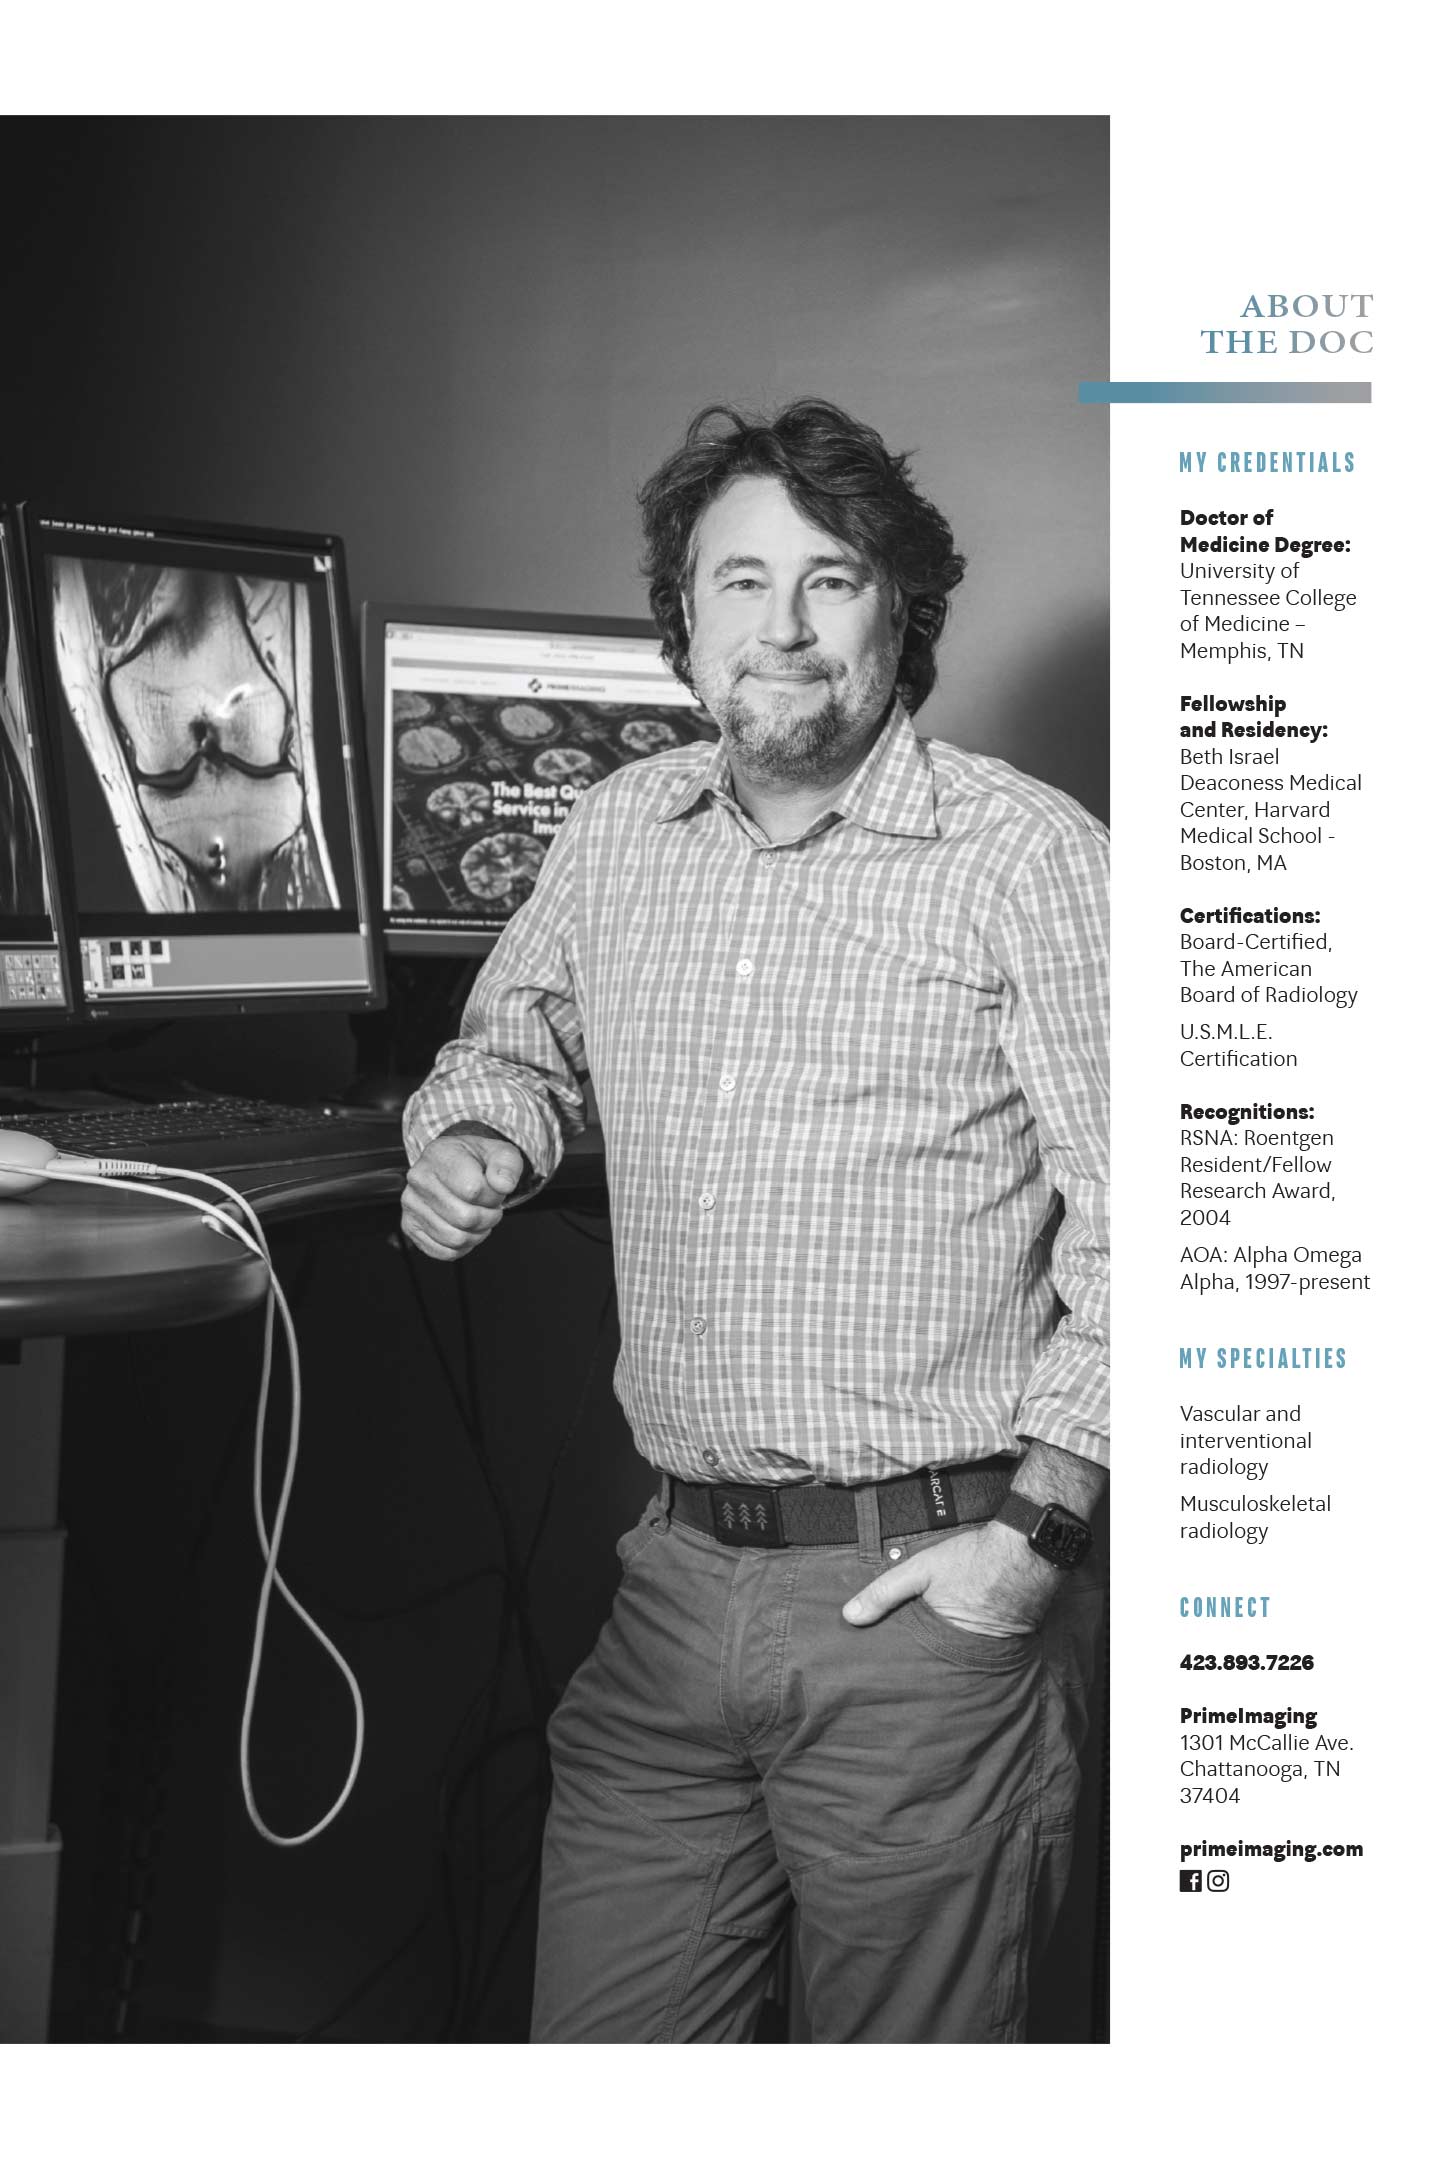 About Dr. Jim Busch at PrimeImaging